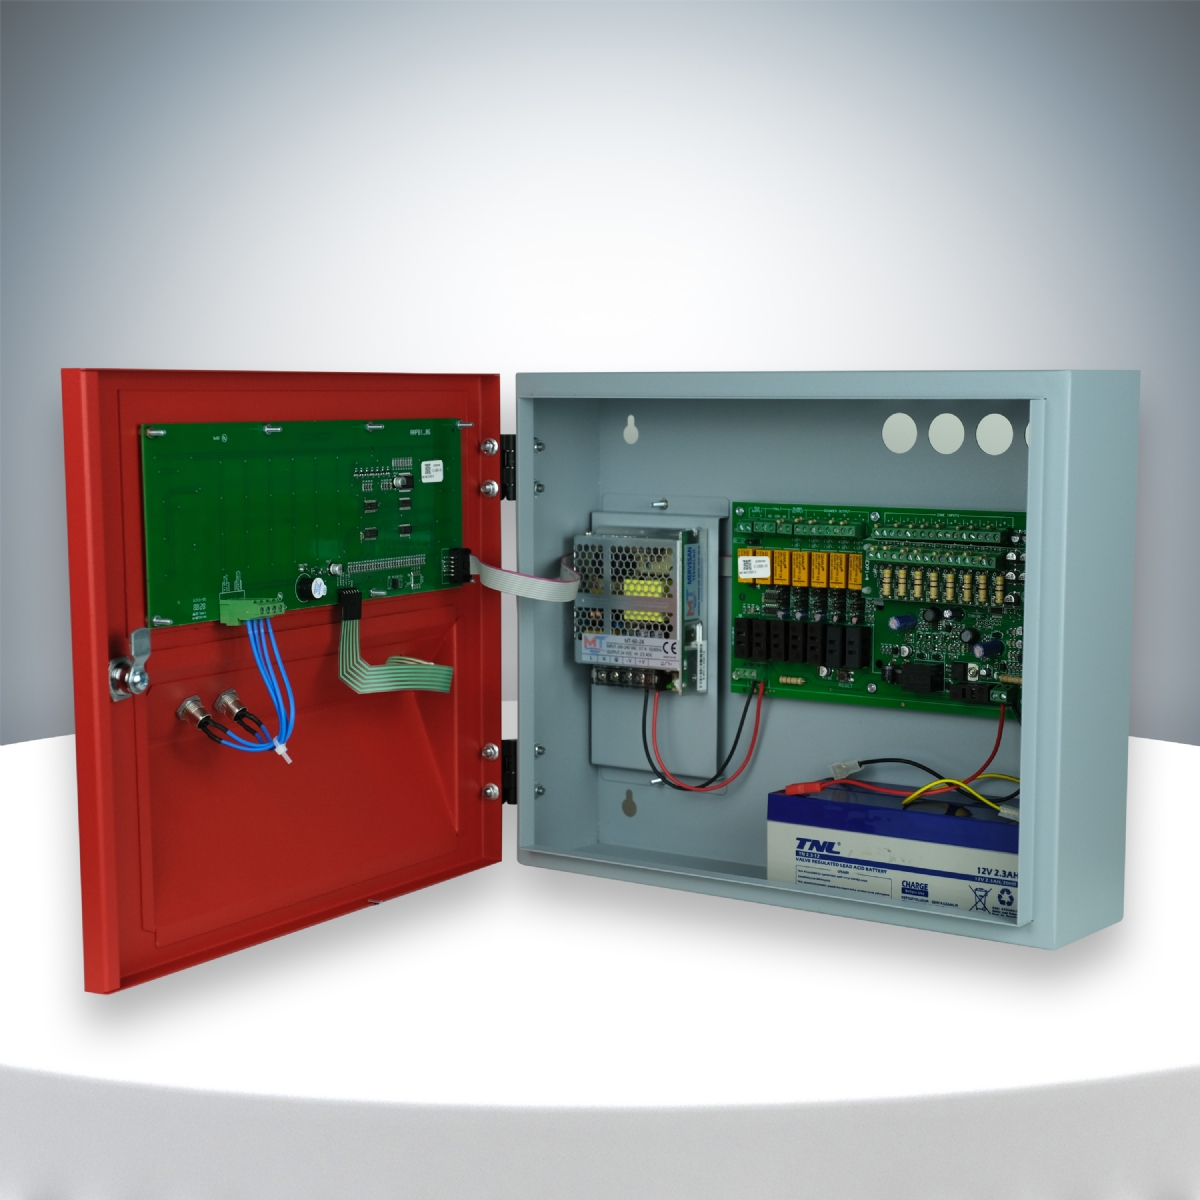 C-1000-4R (Repeater) 4 Zone Conventional Repeater Panel